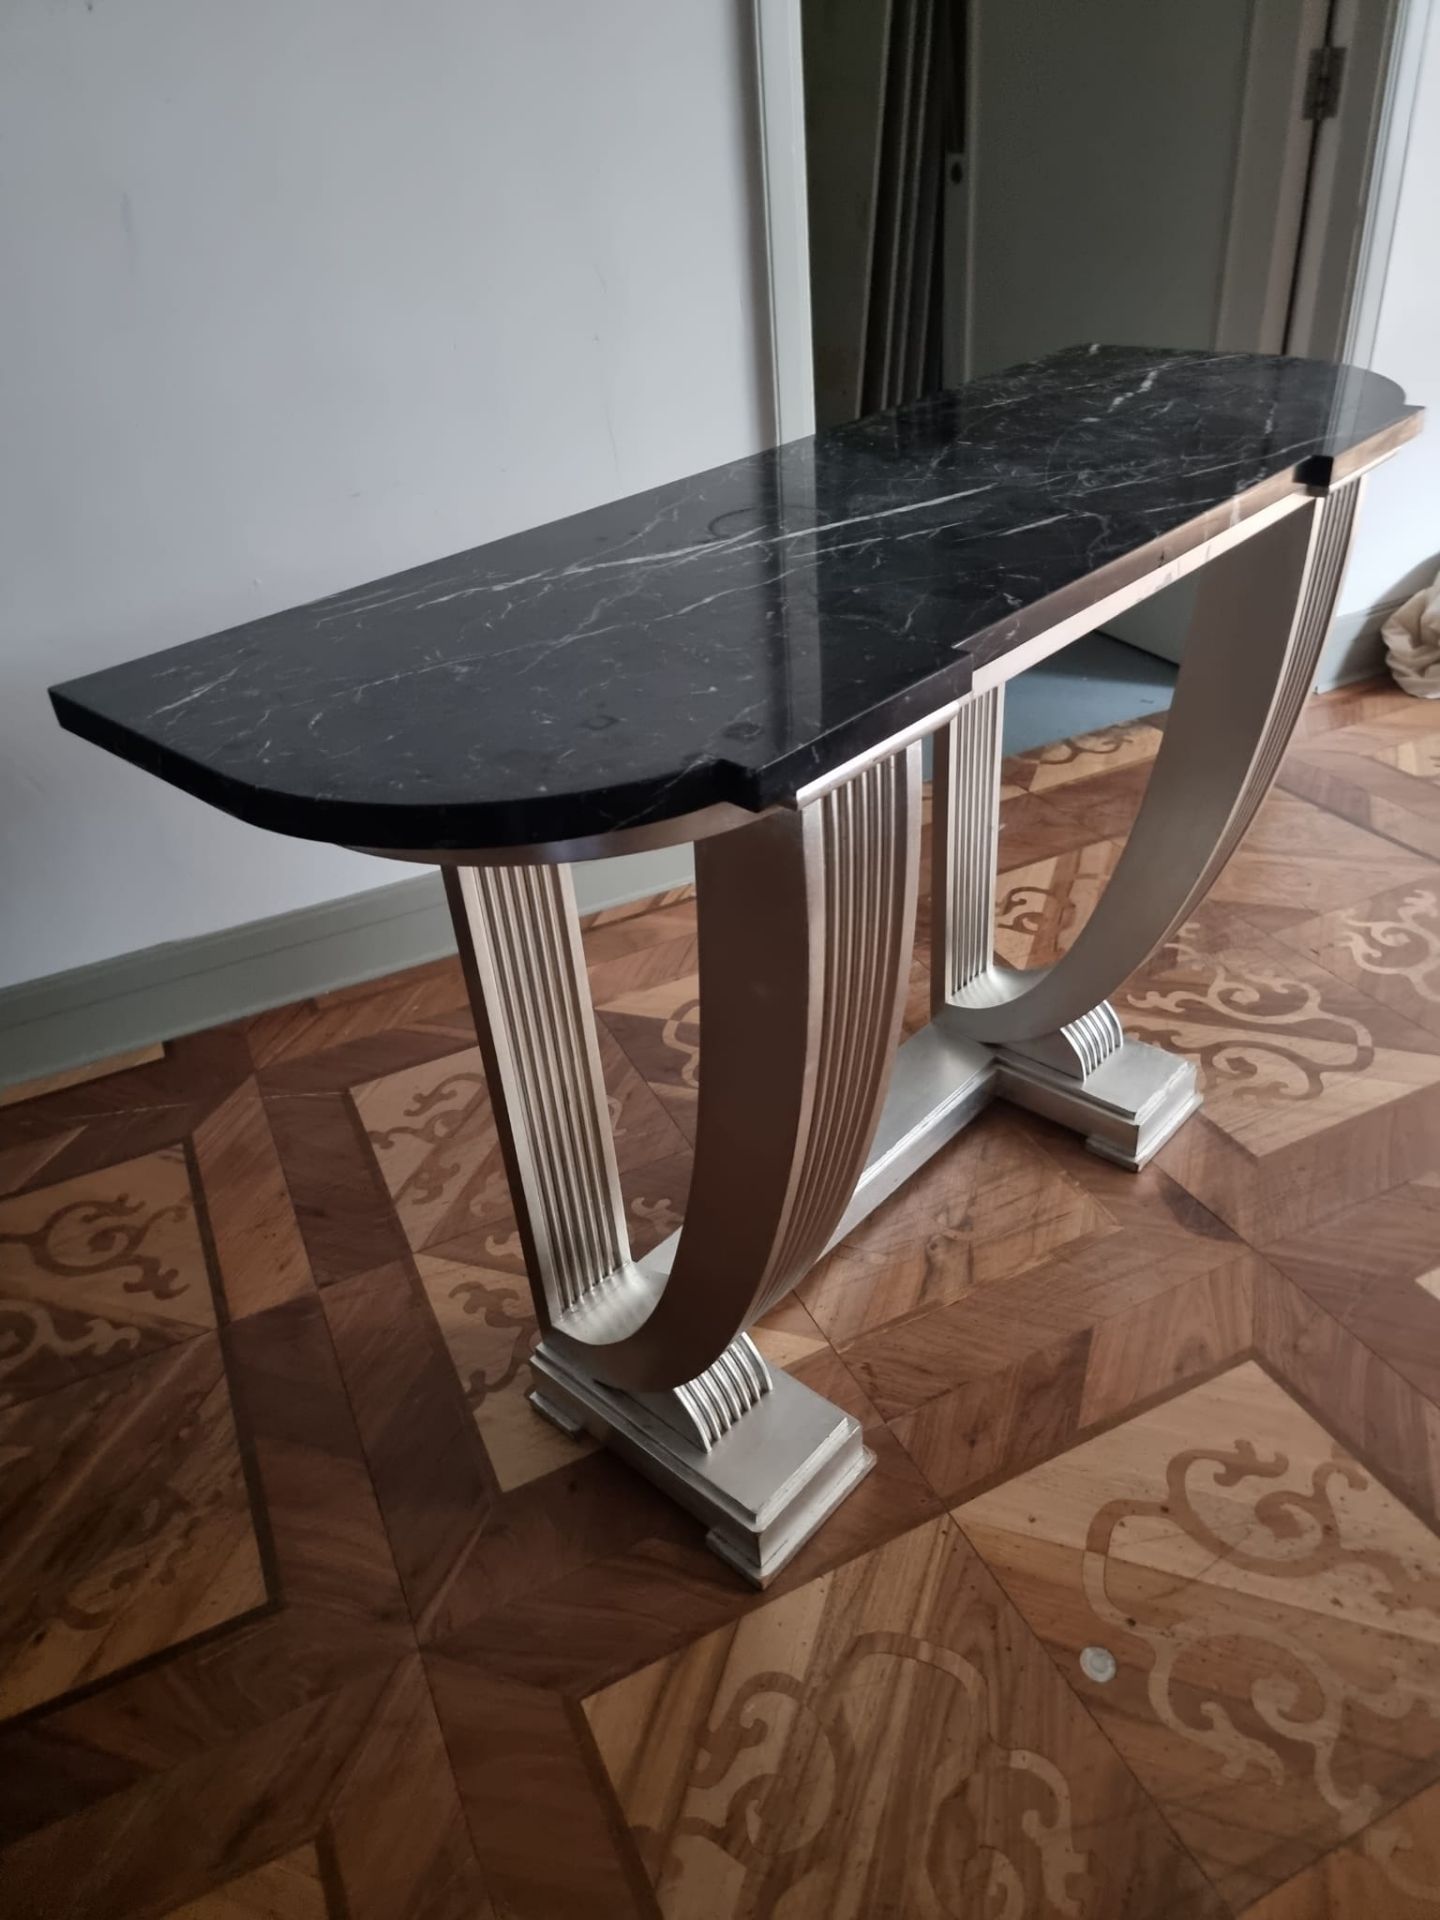 Marble top art deco sttyle consile table the wooden frame painted silver 127 x 47 x 89cm